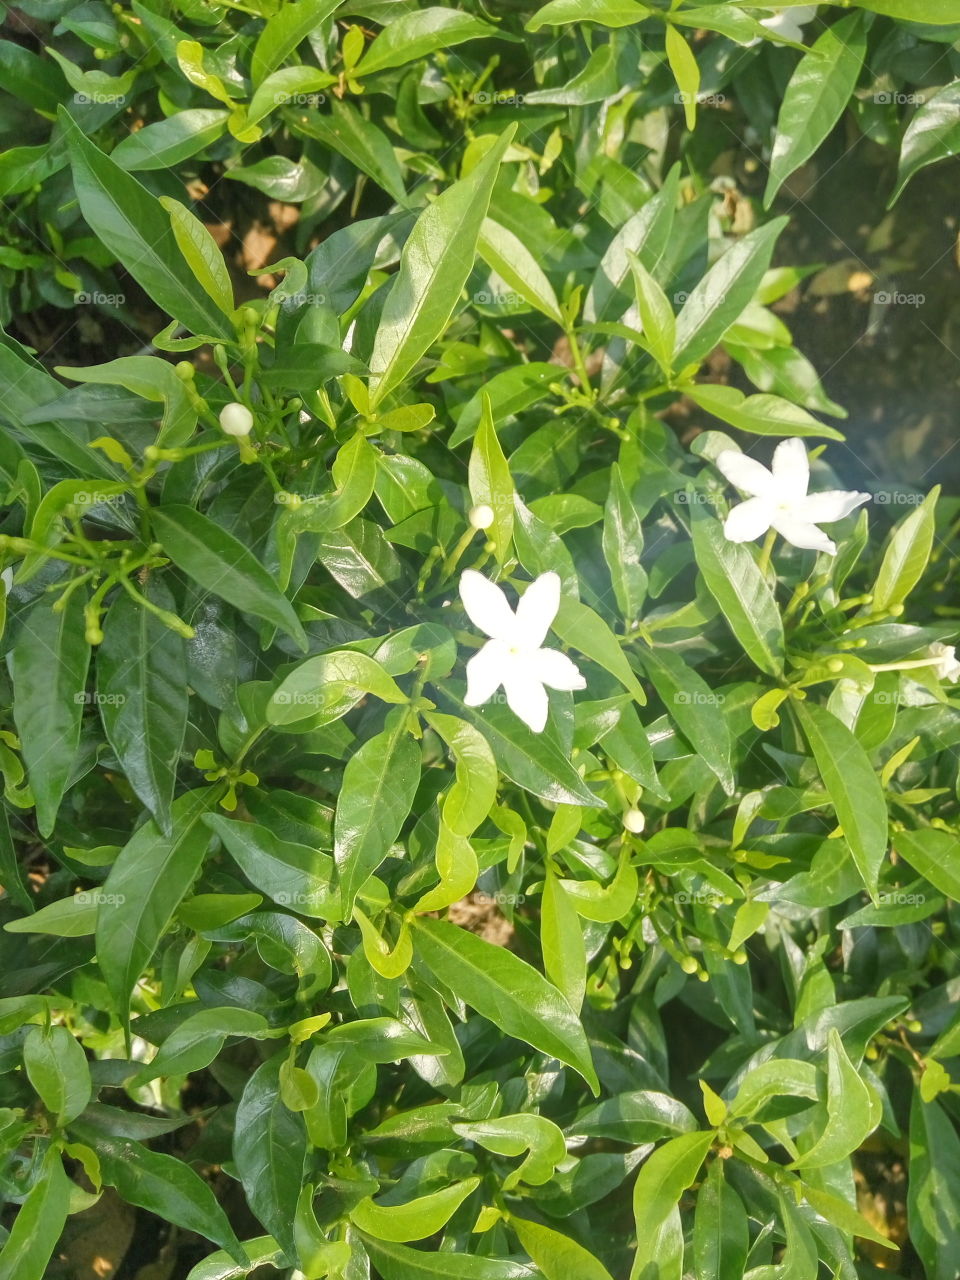 white flowers and green leaves had received sunlight